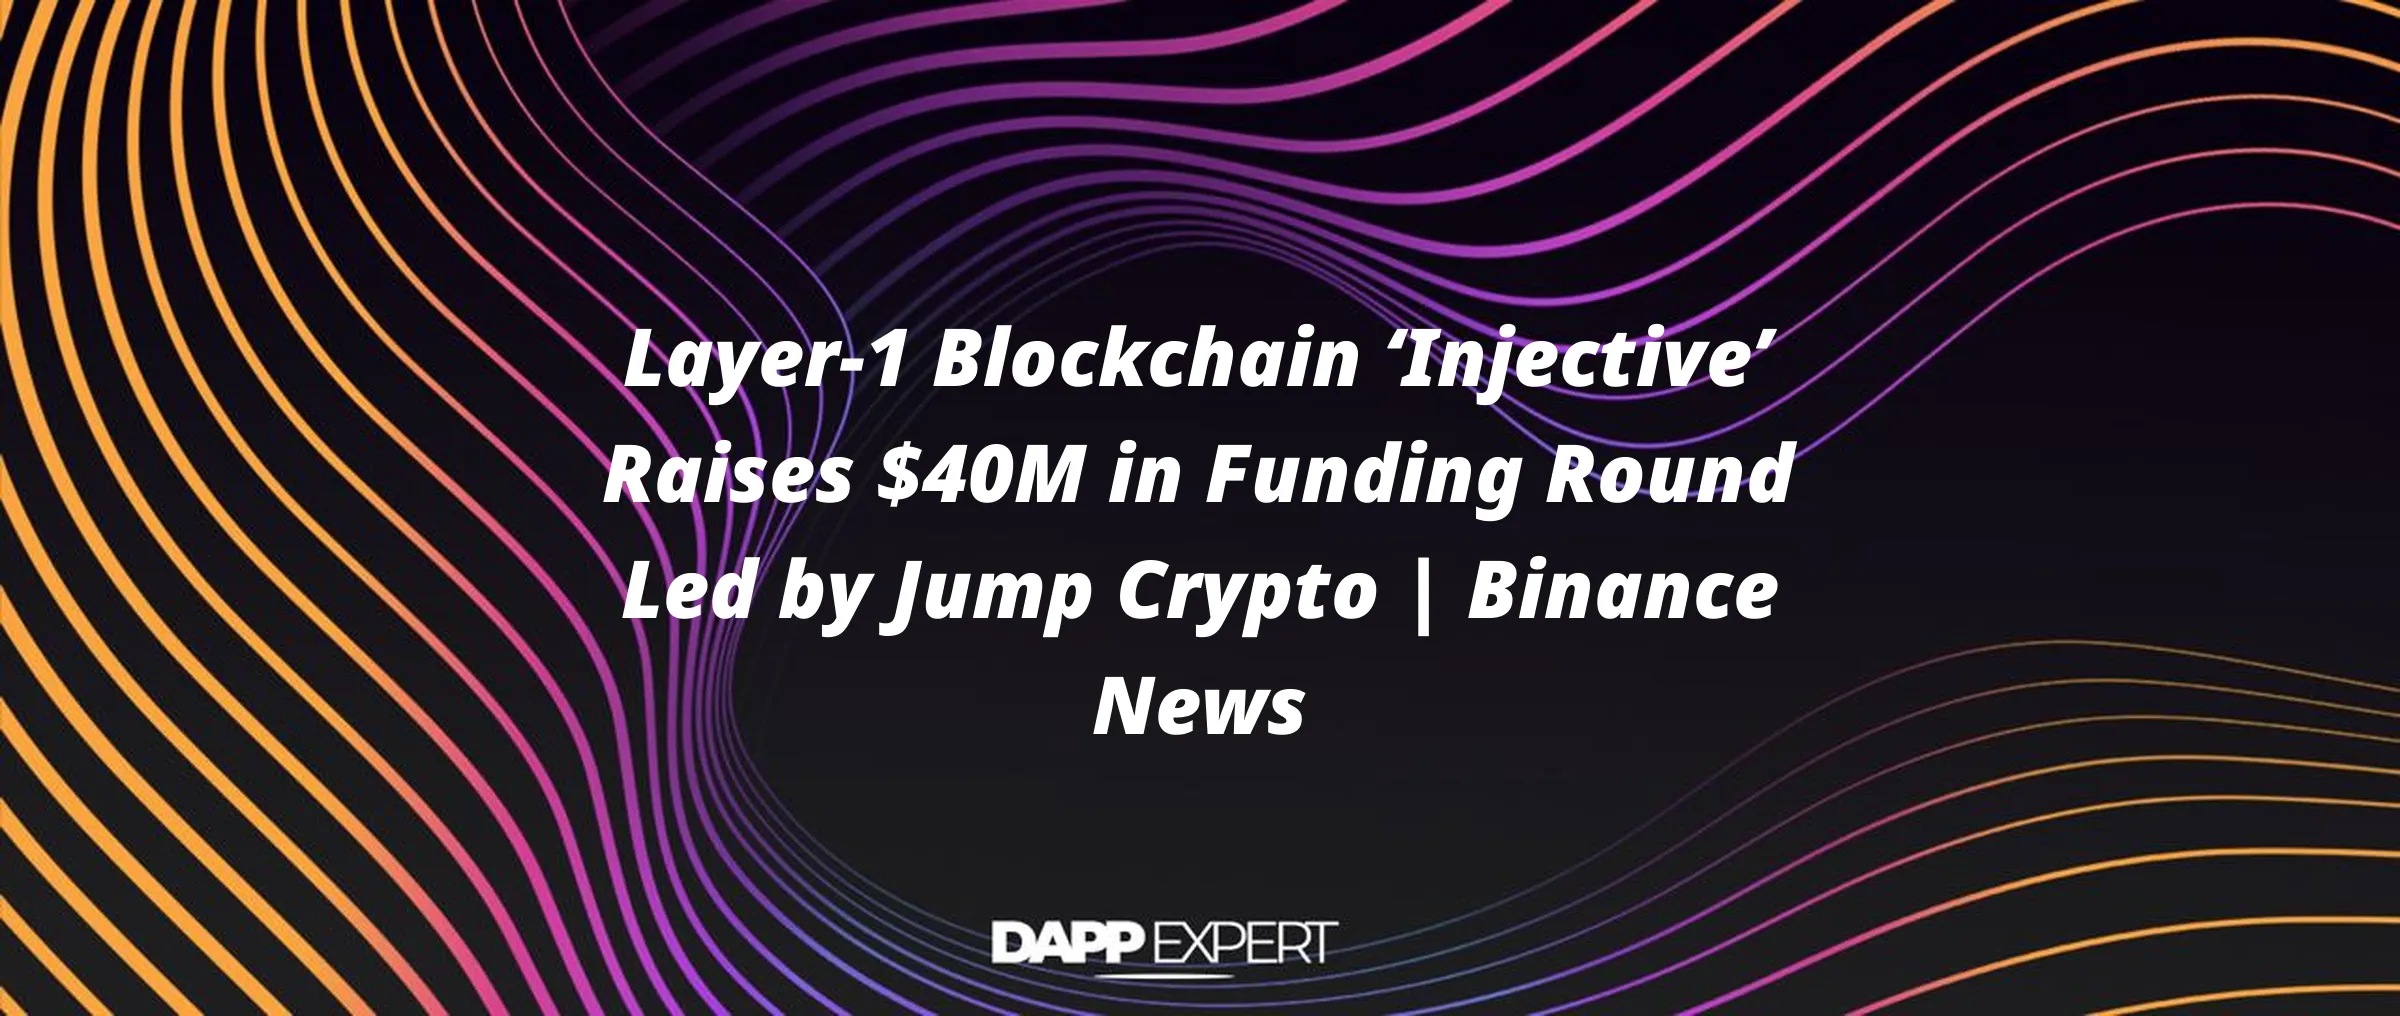 Layer-1 Blockchain ‘Injective’ Raises $40M in Funding Round Led by Jump Crypto